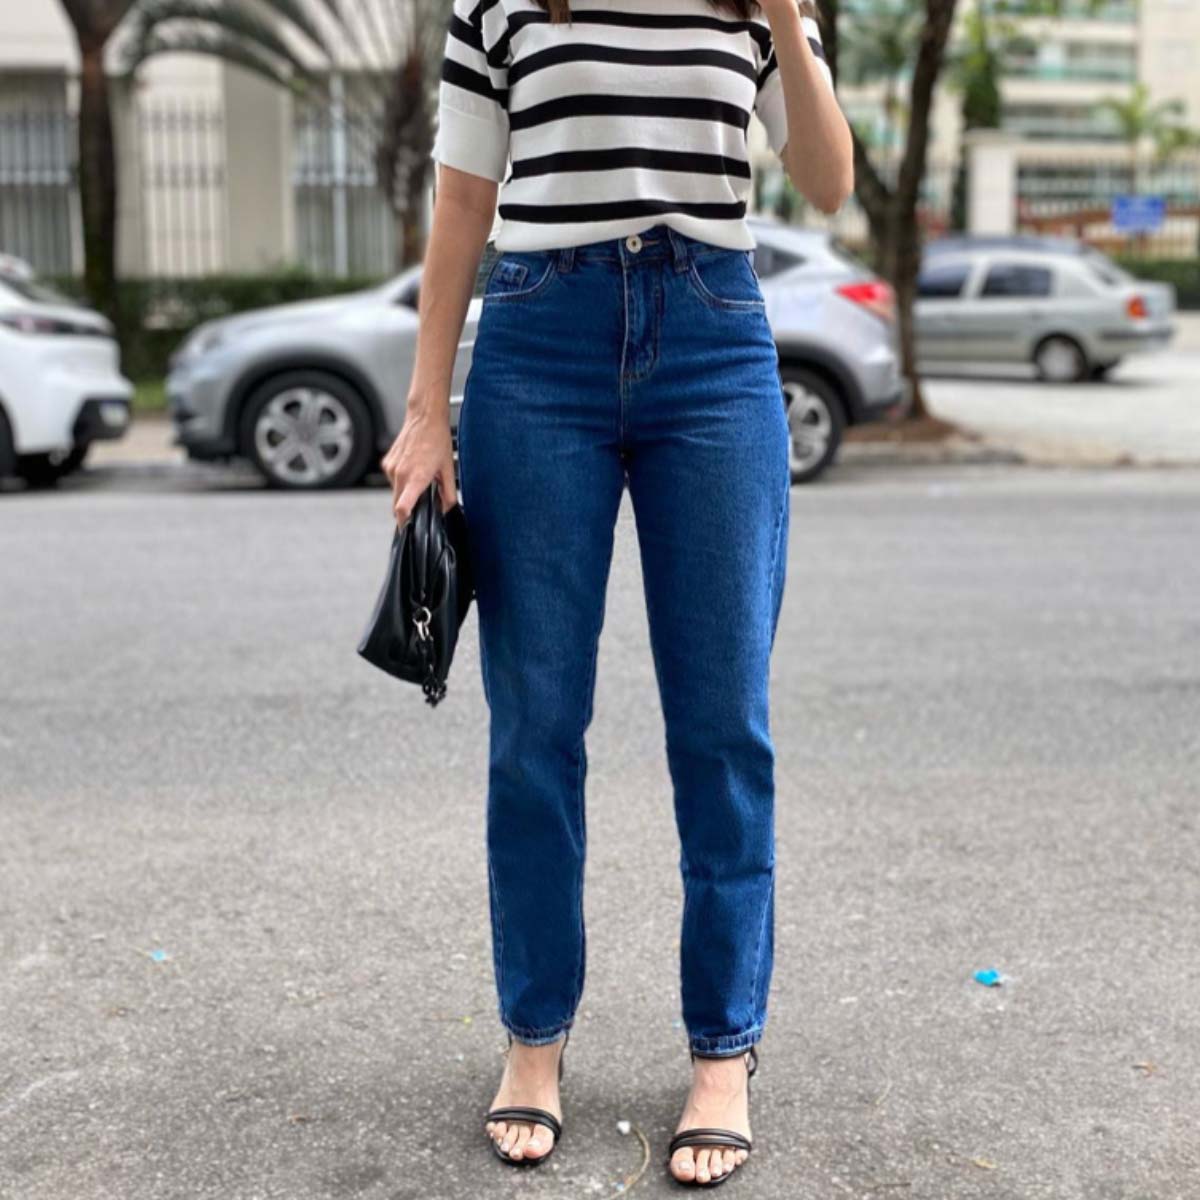 Striped Shirt mom jeans styles for inspiration